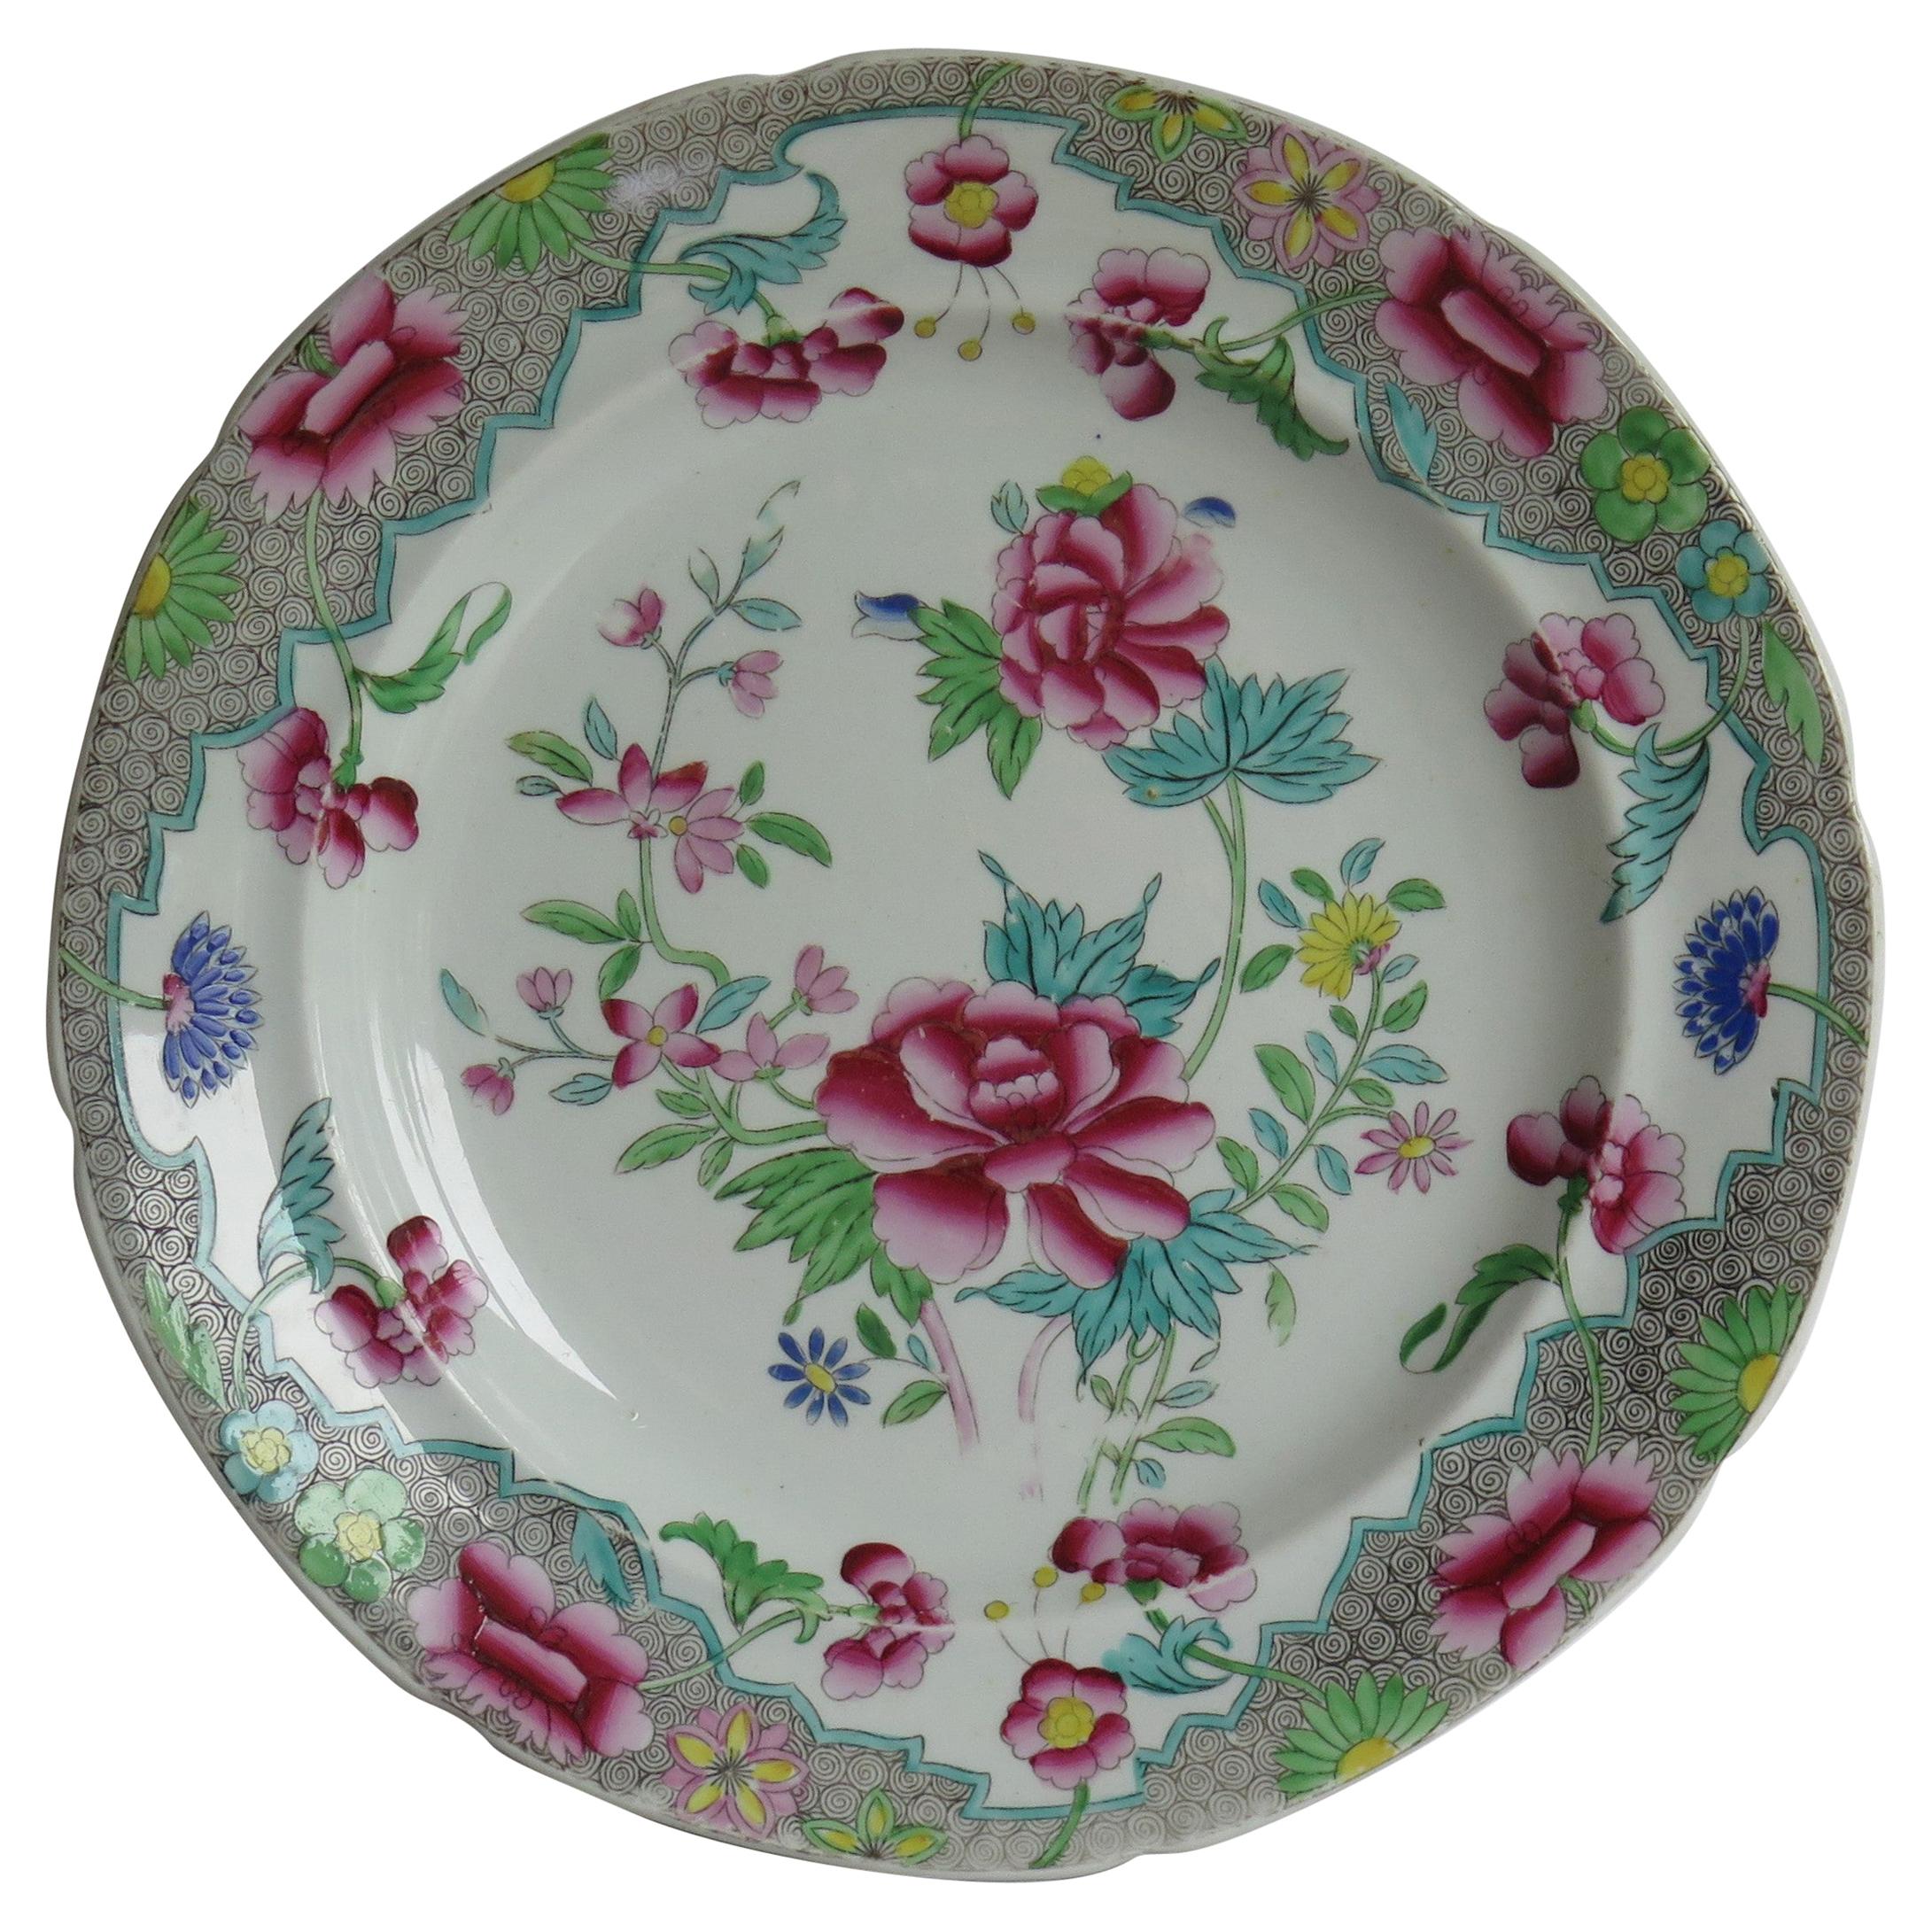 Georgian Hicks and Meigh Ironstone Plate in Floral Pattern No.8, Circa 1815